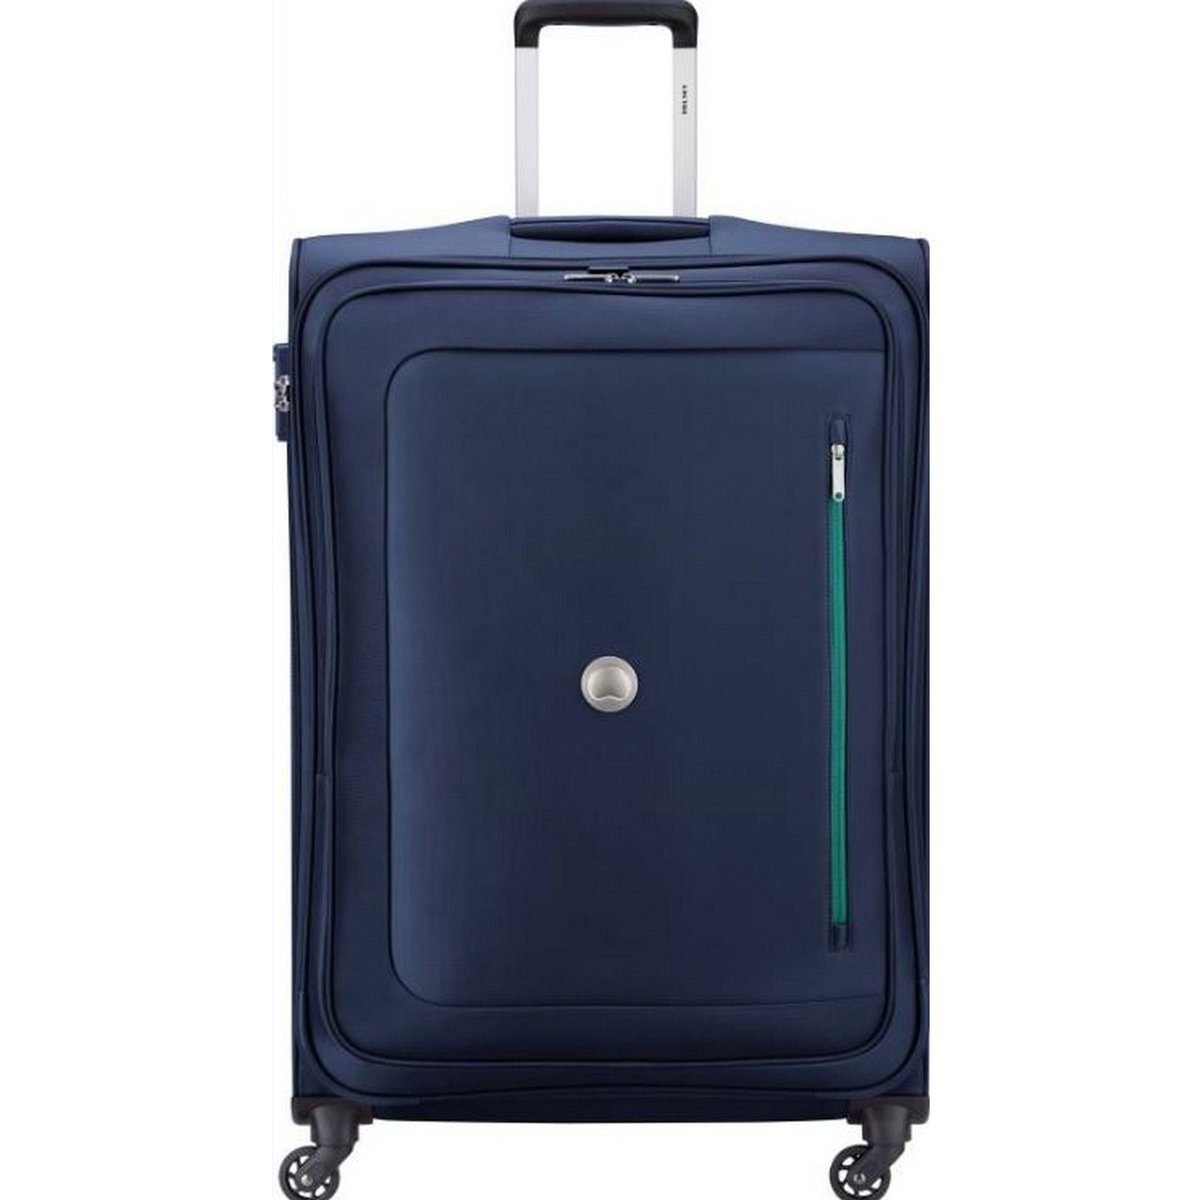 Delsey Oural 4 Wheel Soft Trolley 56cm Navy Blue